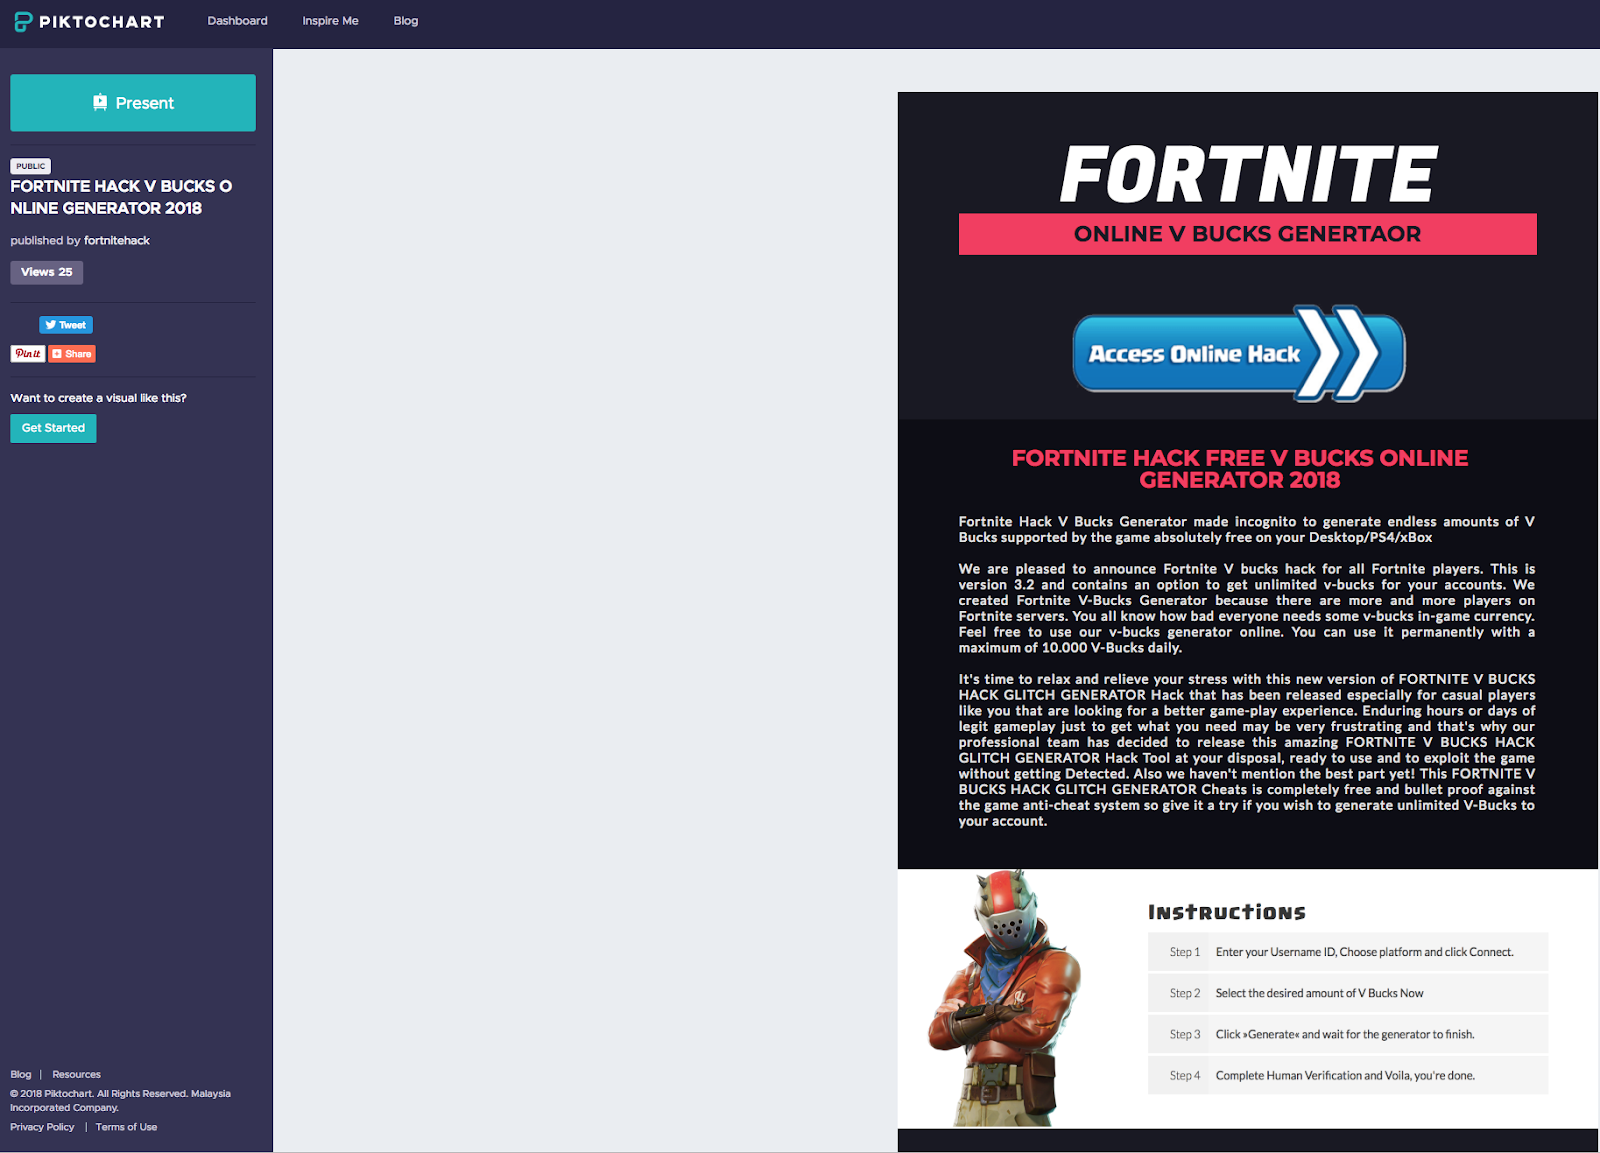 Free V-Bucks Generator: Scam or Legit Way to Get Fortnite Currency and  Codes?